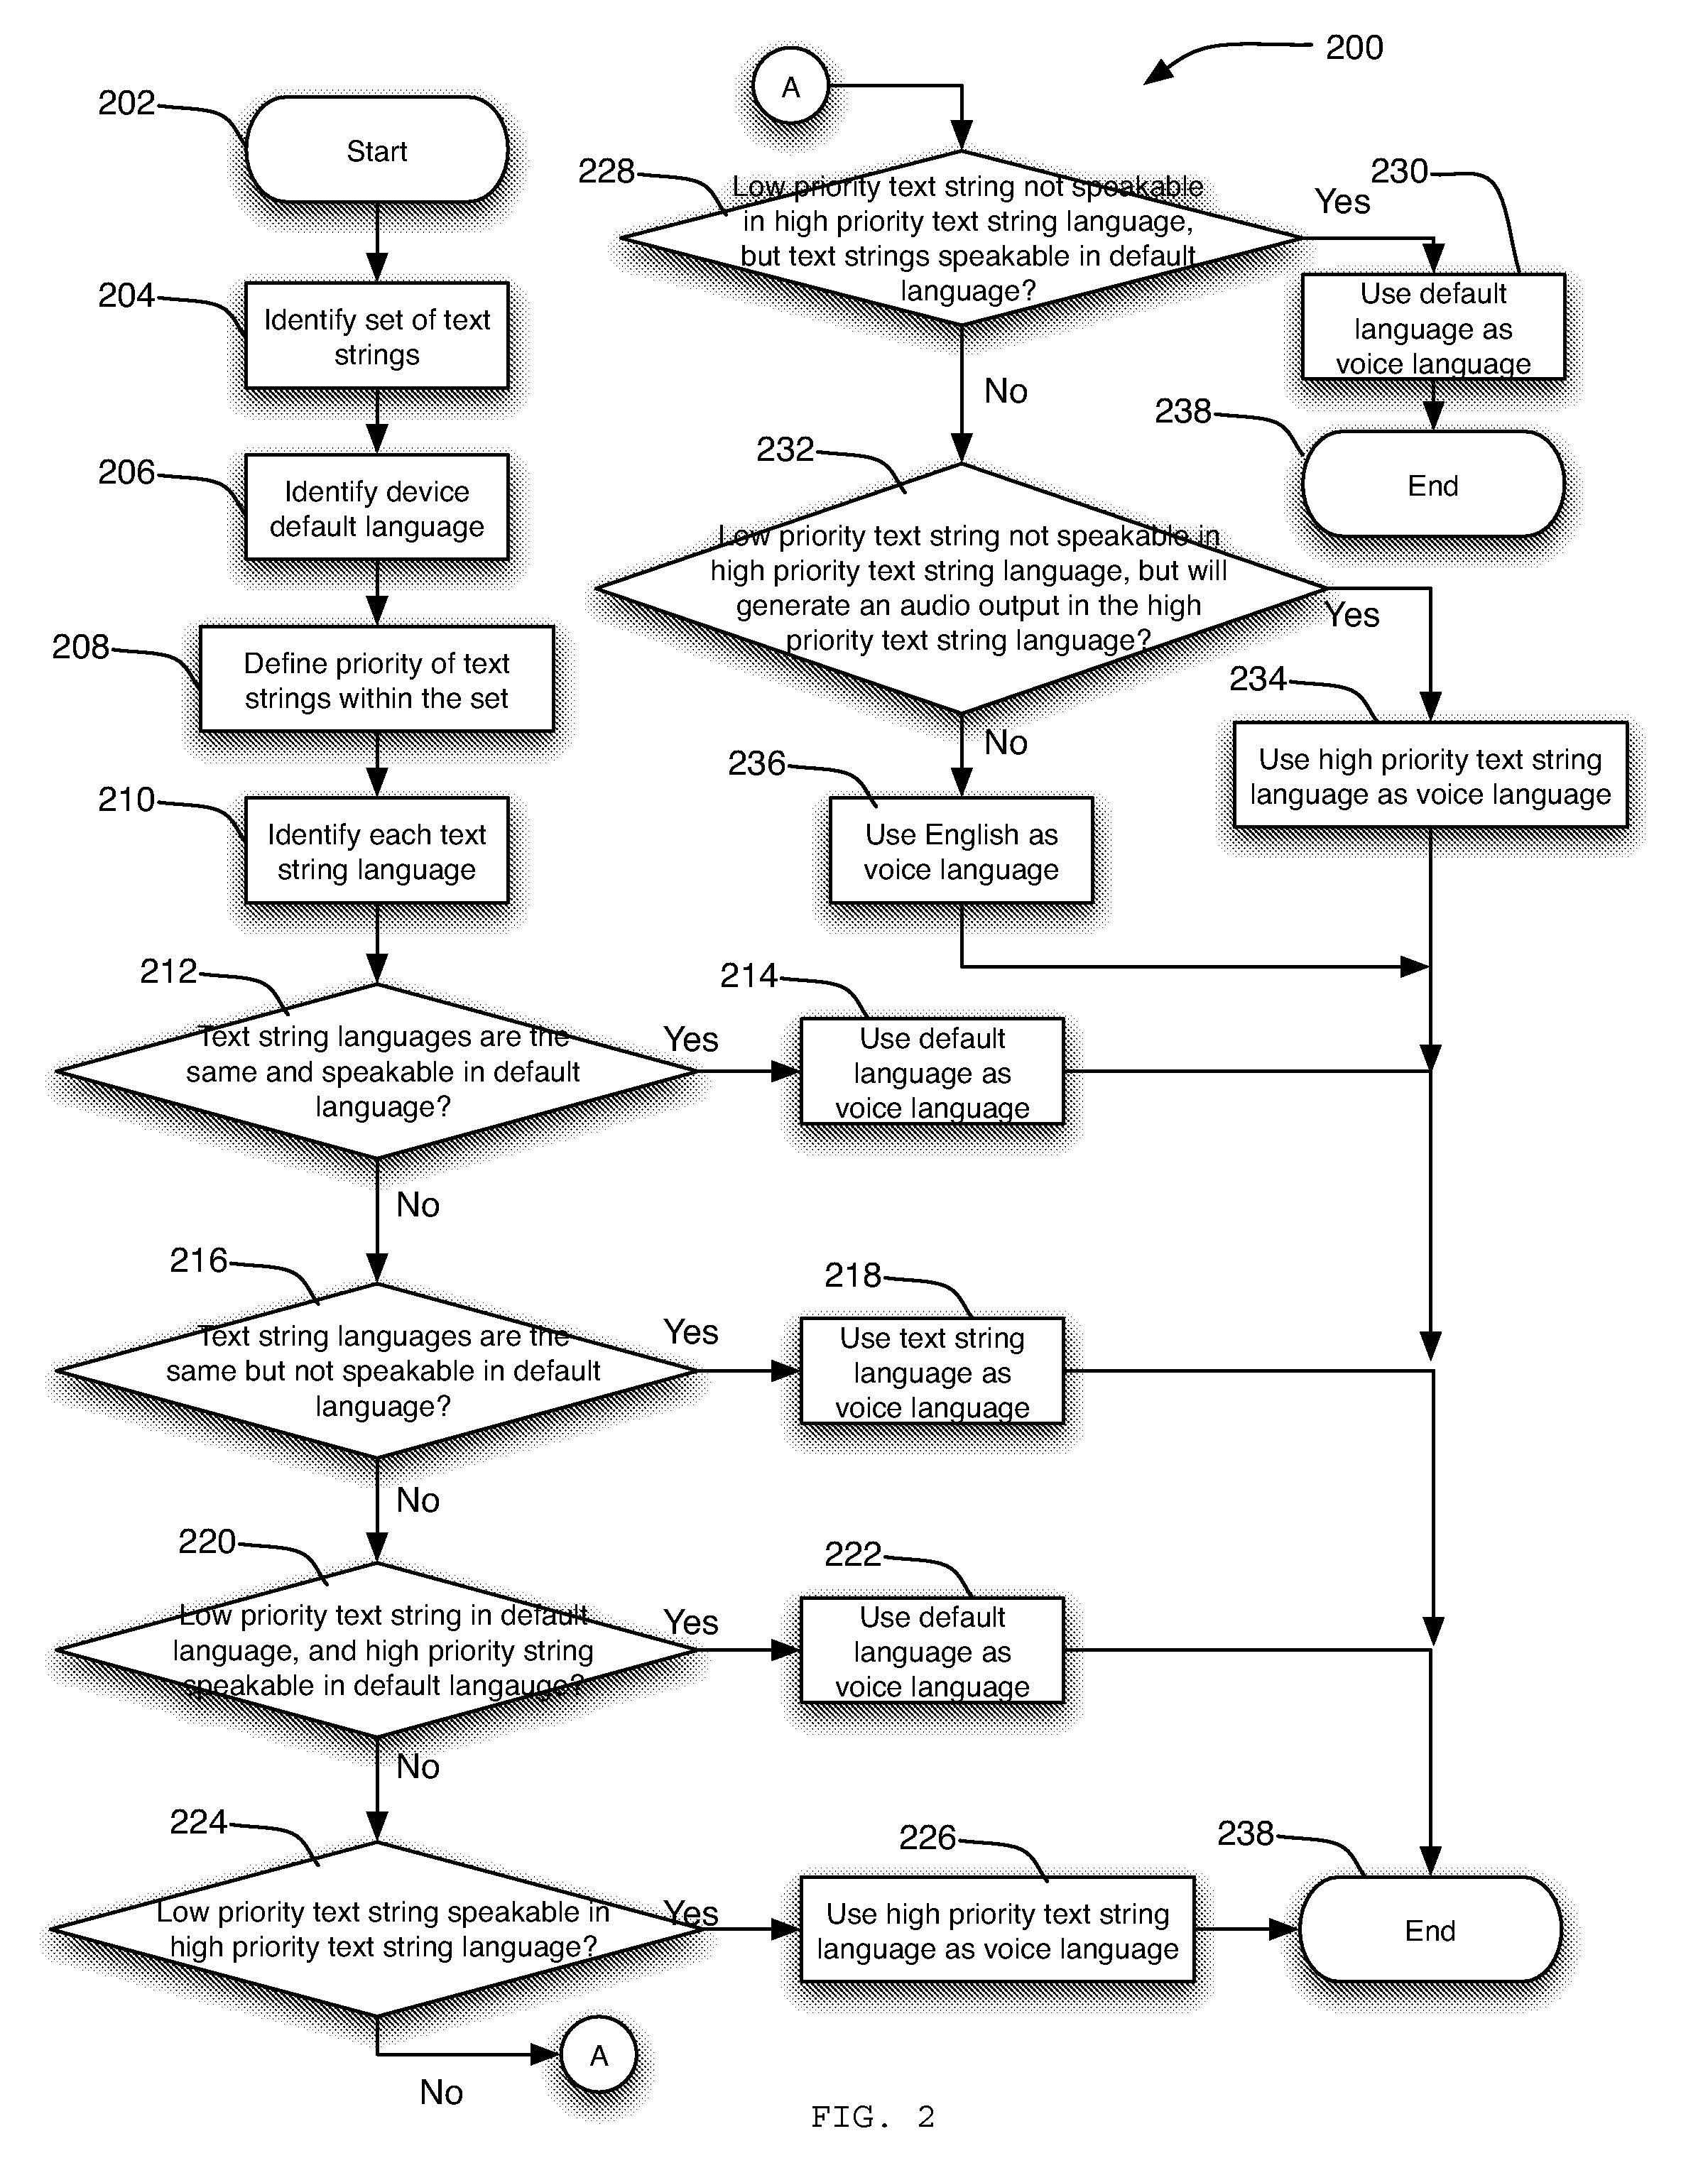 Systems and methods for determining the language to use for speech generated by a text to speech engine